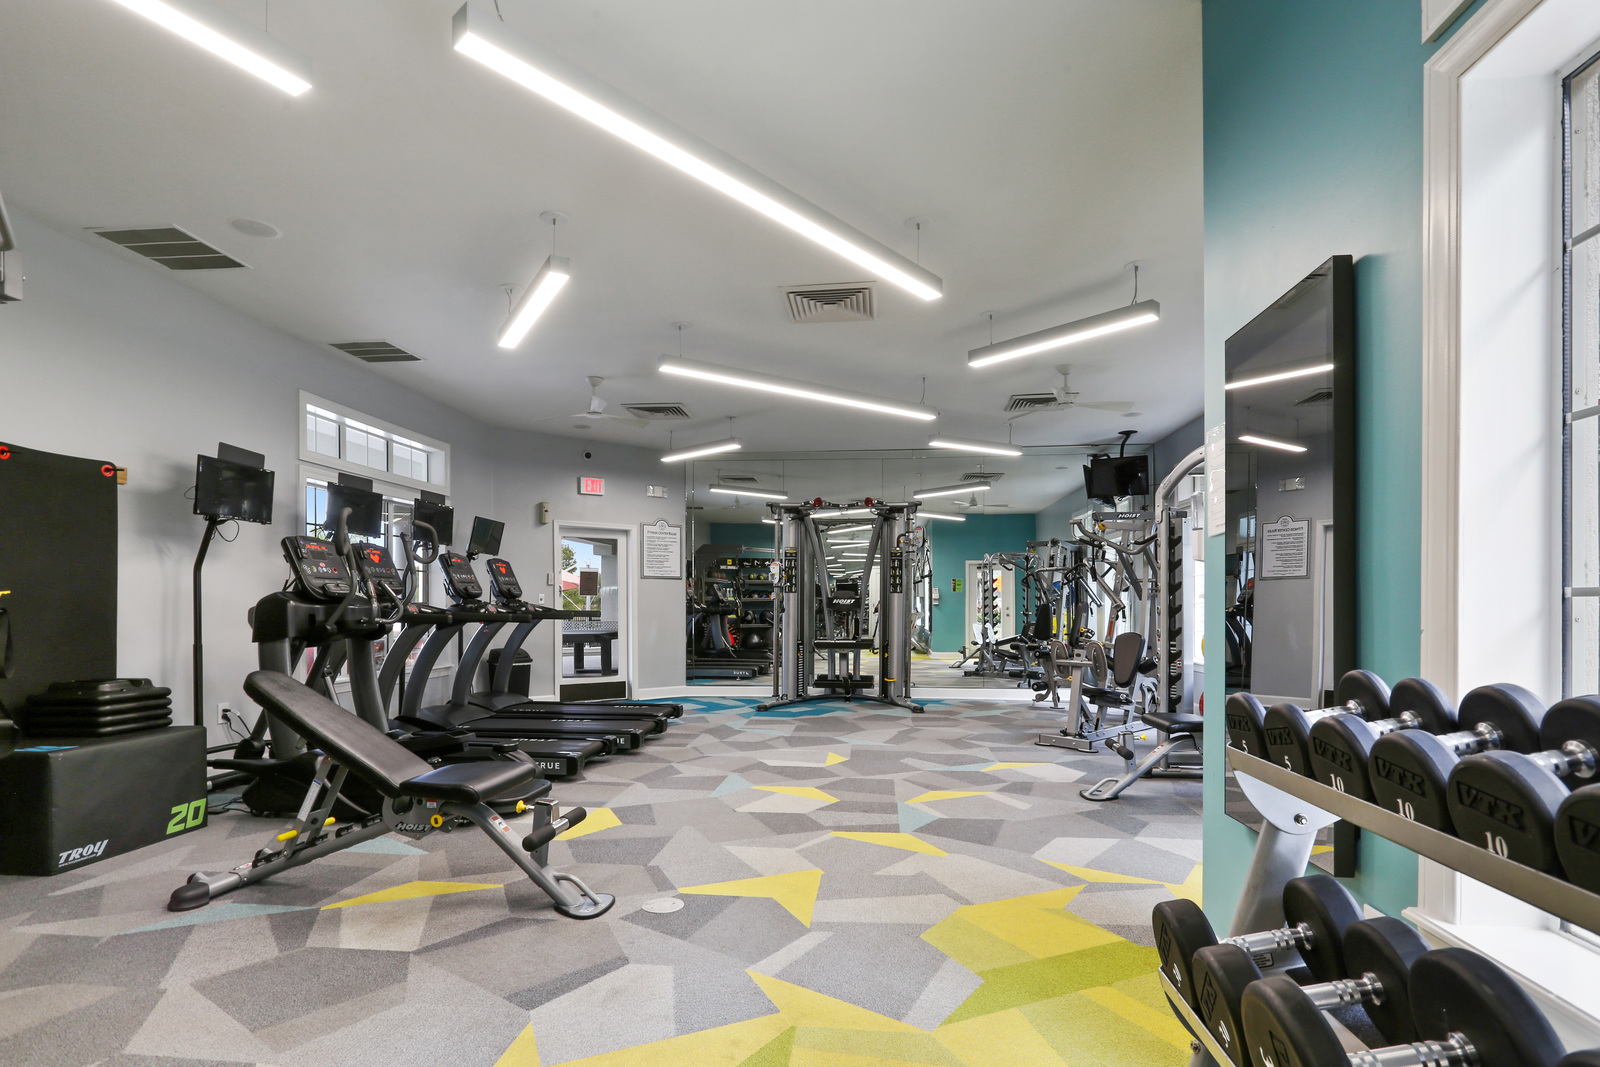 STAYING FIT IS EASY AT REGISTRY AT WINDSOR PARKE